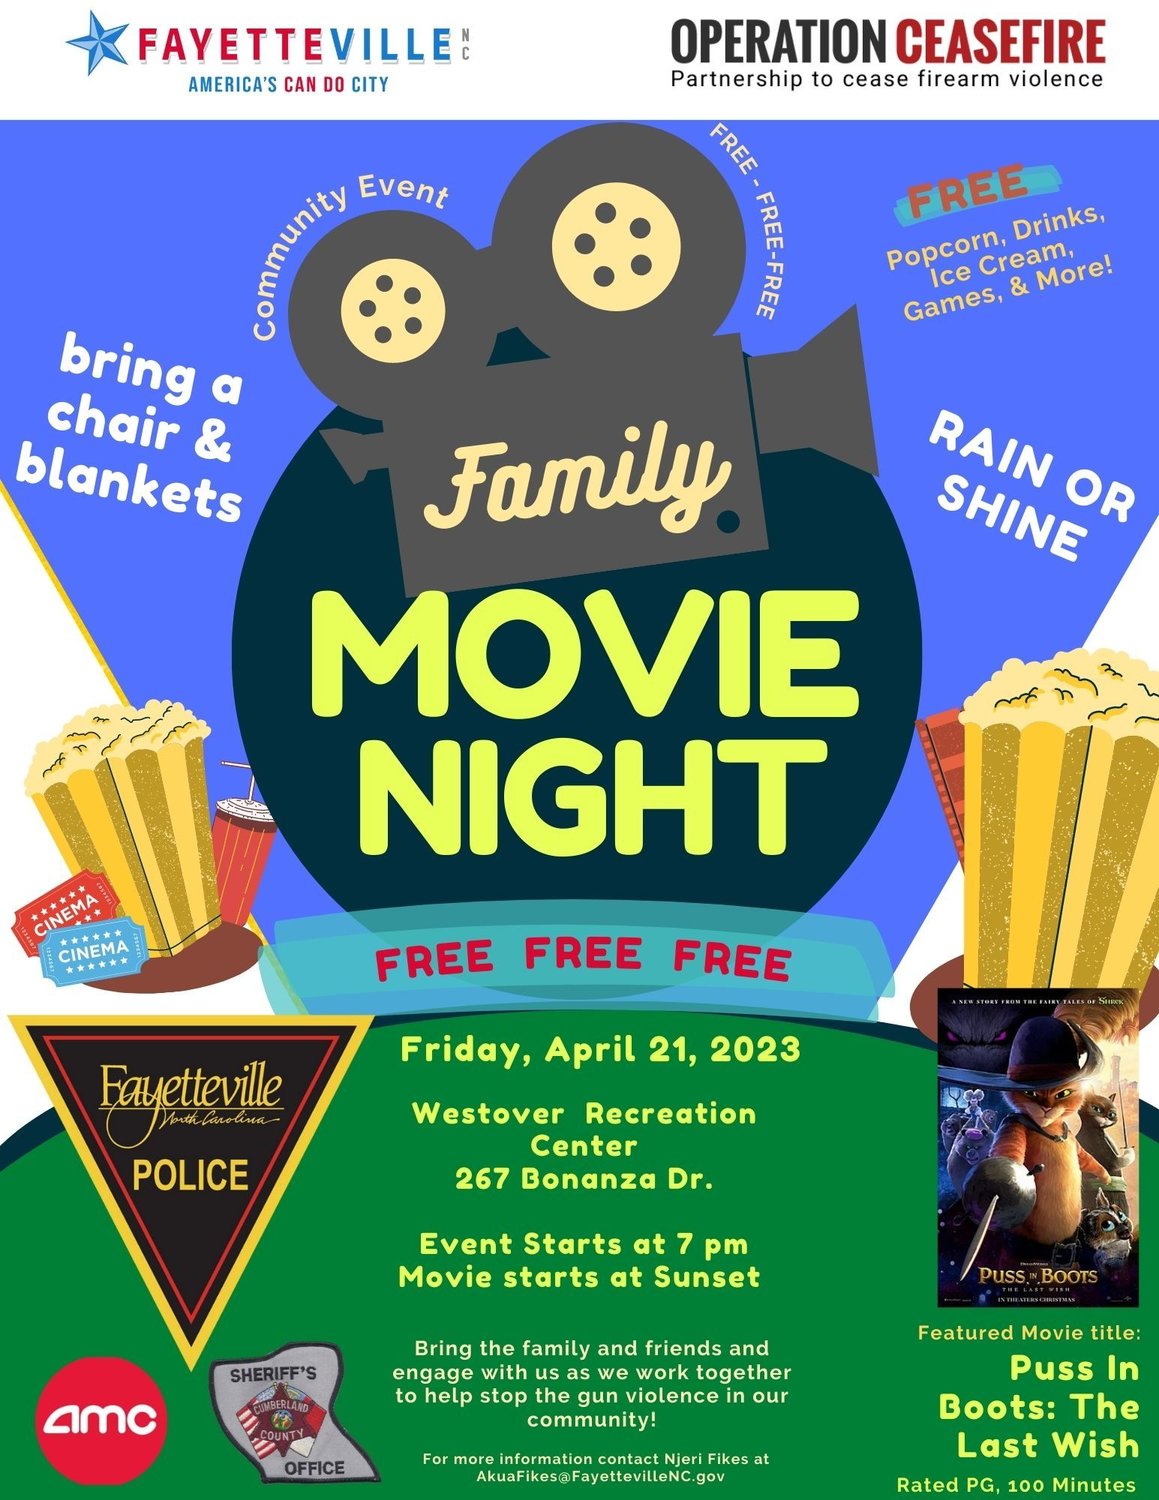 Family Movie Night to support Operation Ceasefire will present "Puss in Boots: The Last Wish" on April 21 at Westover Recreation Center, 267 Bonanza Drive.